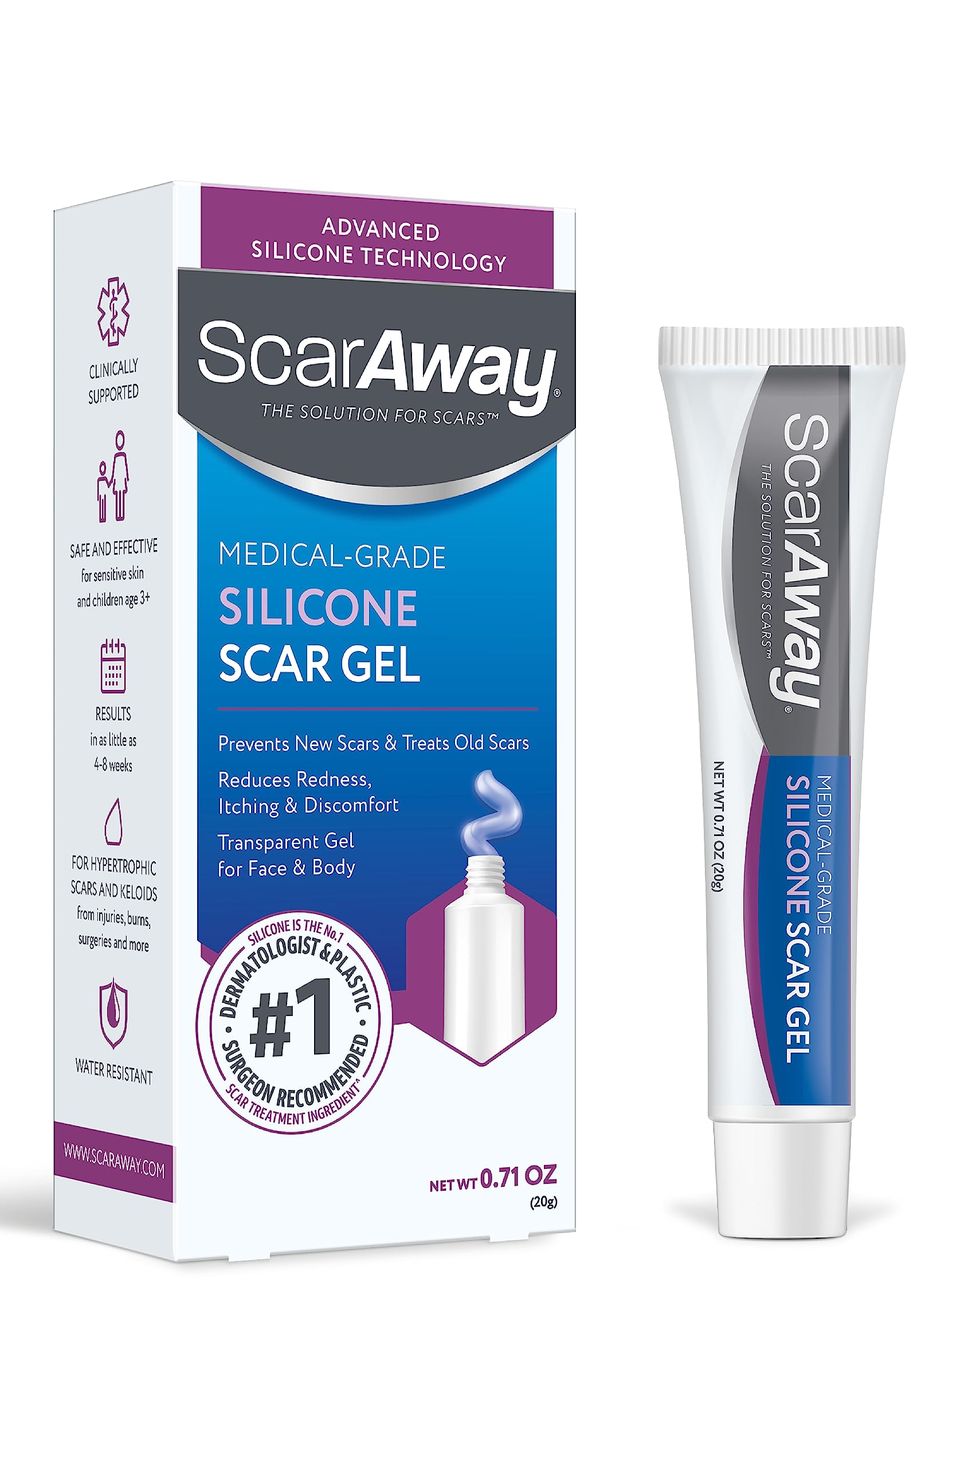 Before and after views of silicone gel treatment in scar